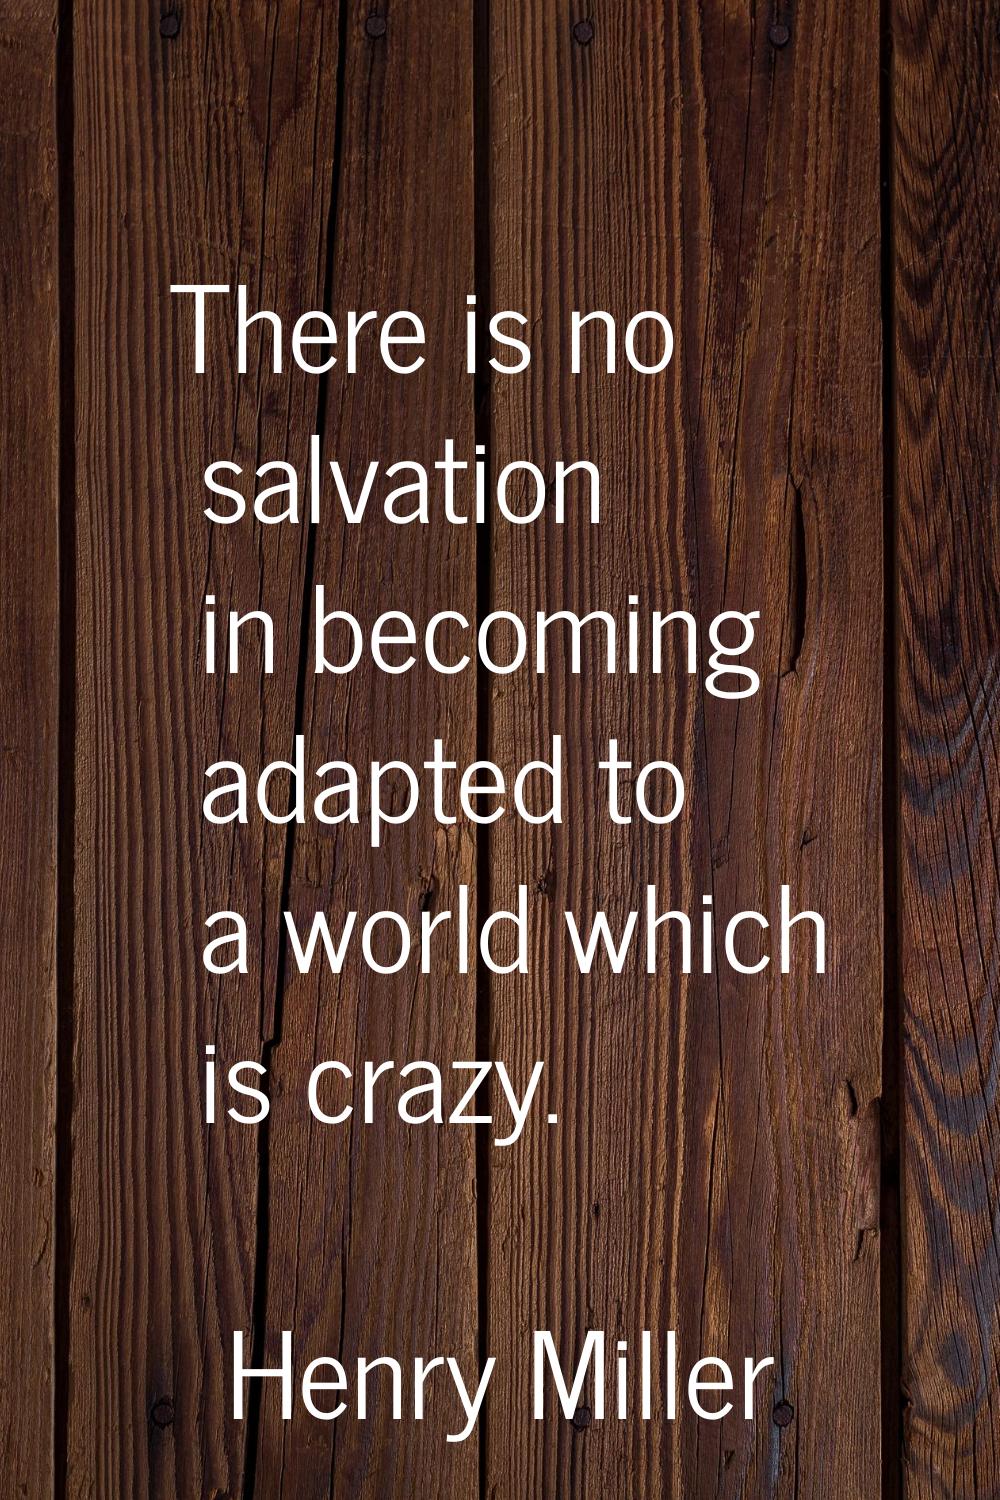 There is no salvation in becoming adapted to a world which is crazy.